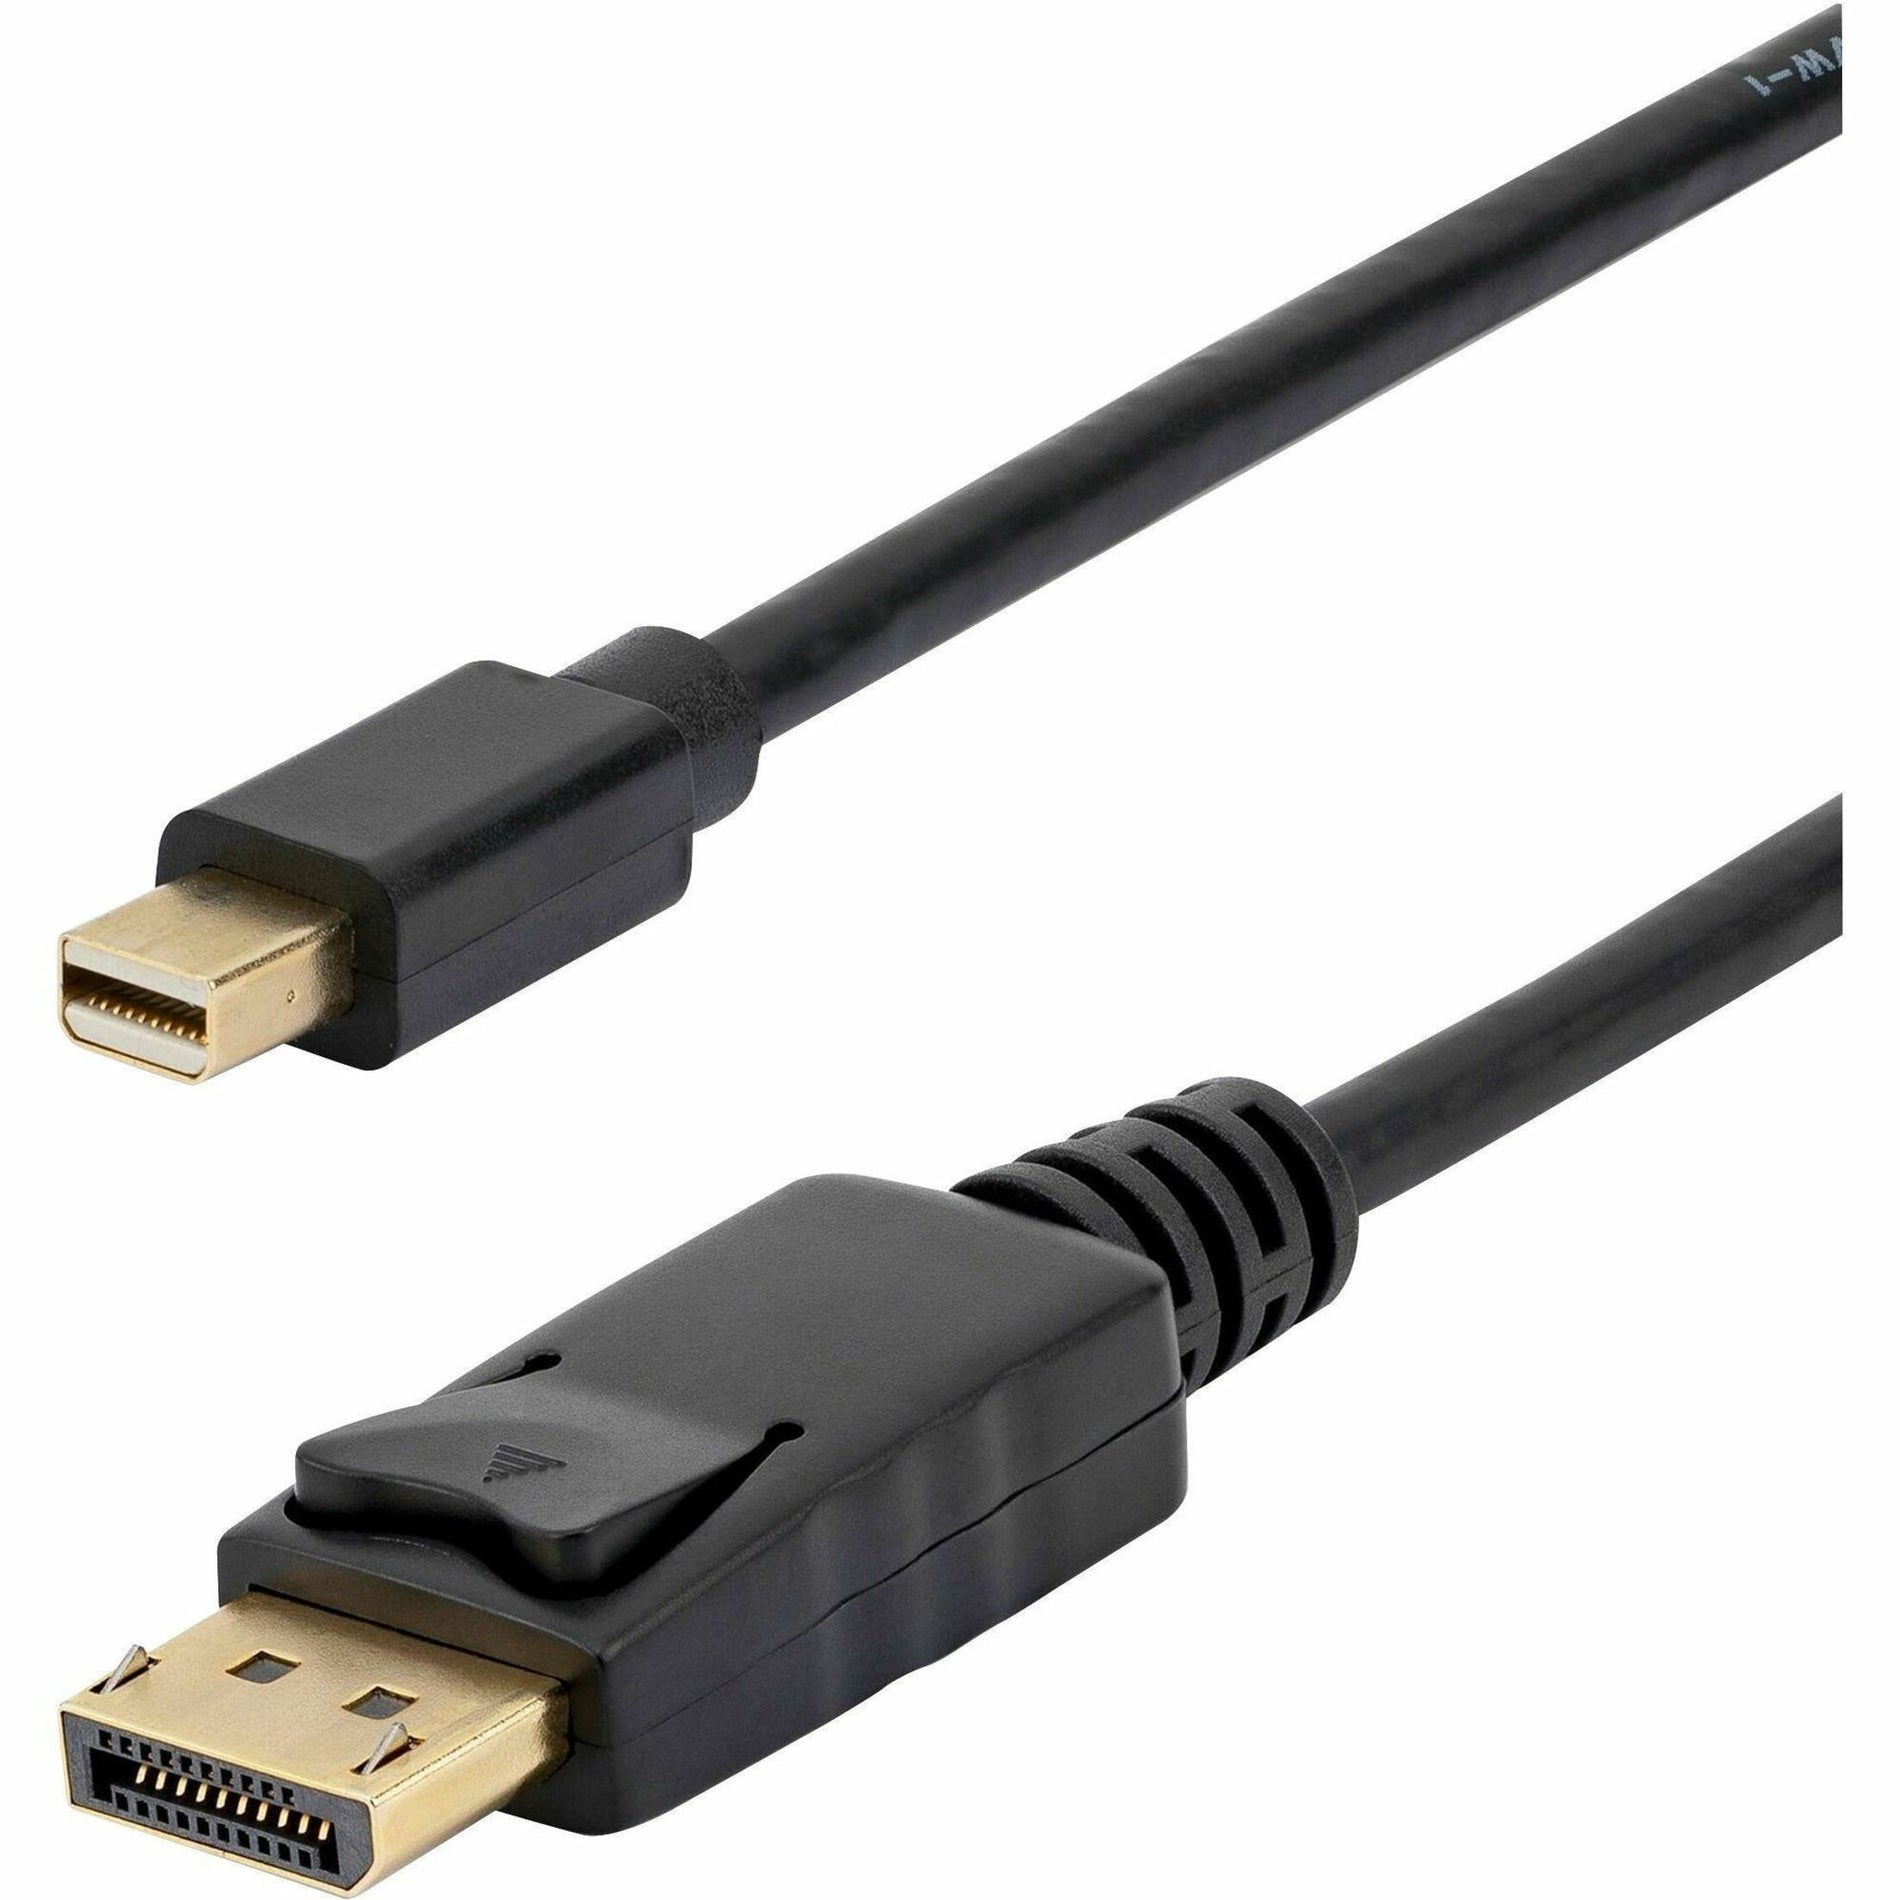 StarTech.com MDP2DPMM10 10 ft Mini DisplayPort to DisplayPort 1.2 Adapter Cable M/M, 4k DisplayPort/Mini DisplayPort Cable, 10ft Length